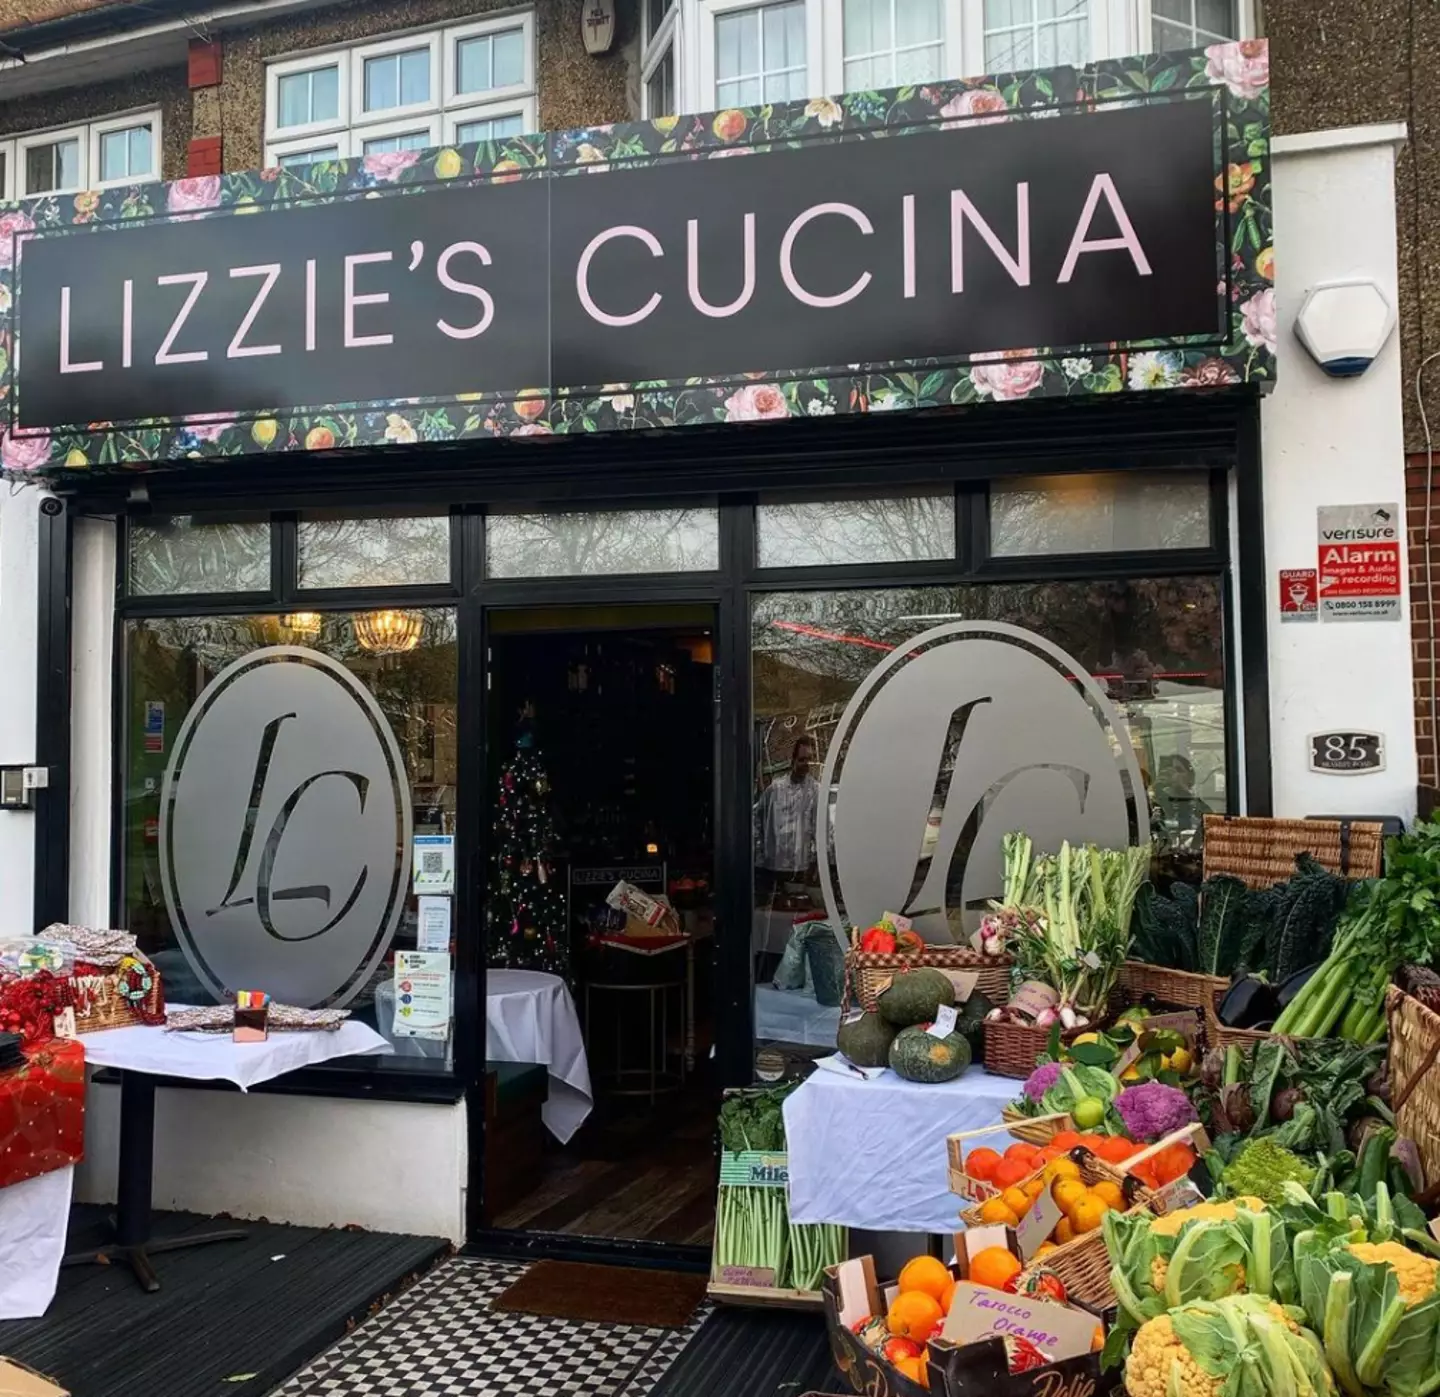 The owner of Lizzie's Cucina explains despite using substitutes, customers still only really want pizzas with the traditional tomato base.